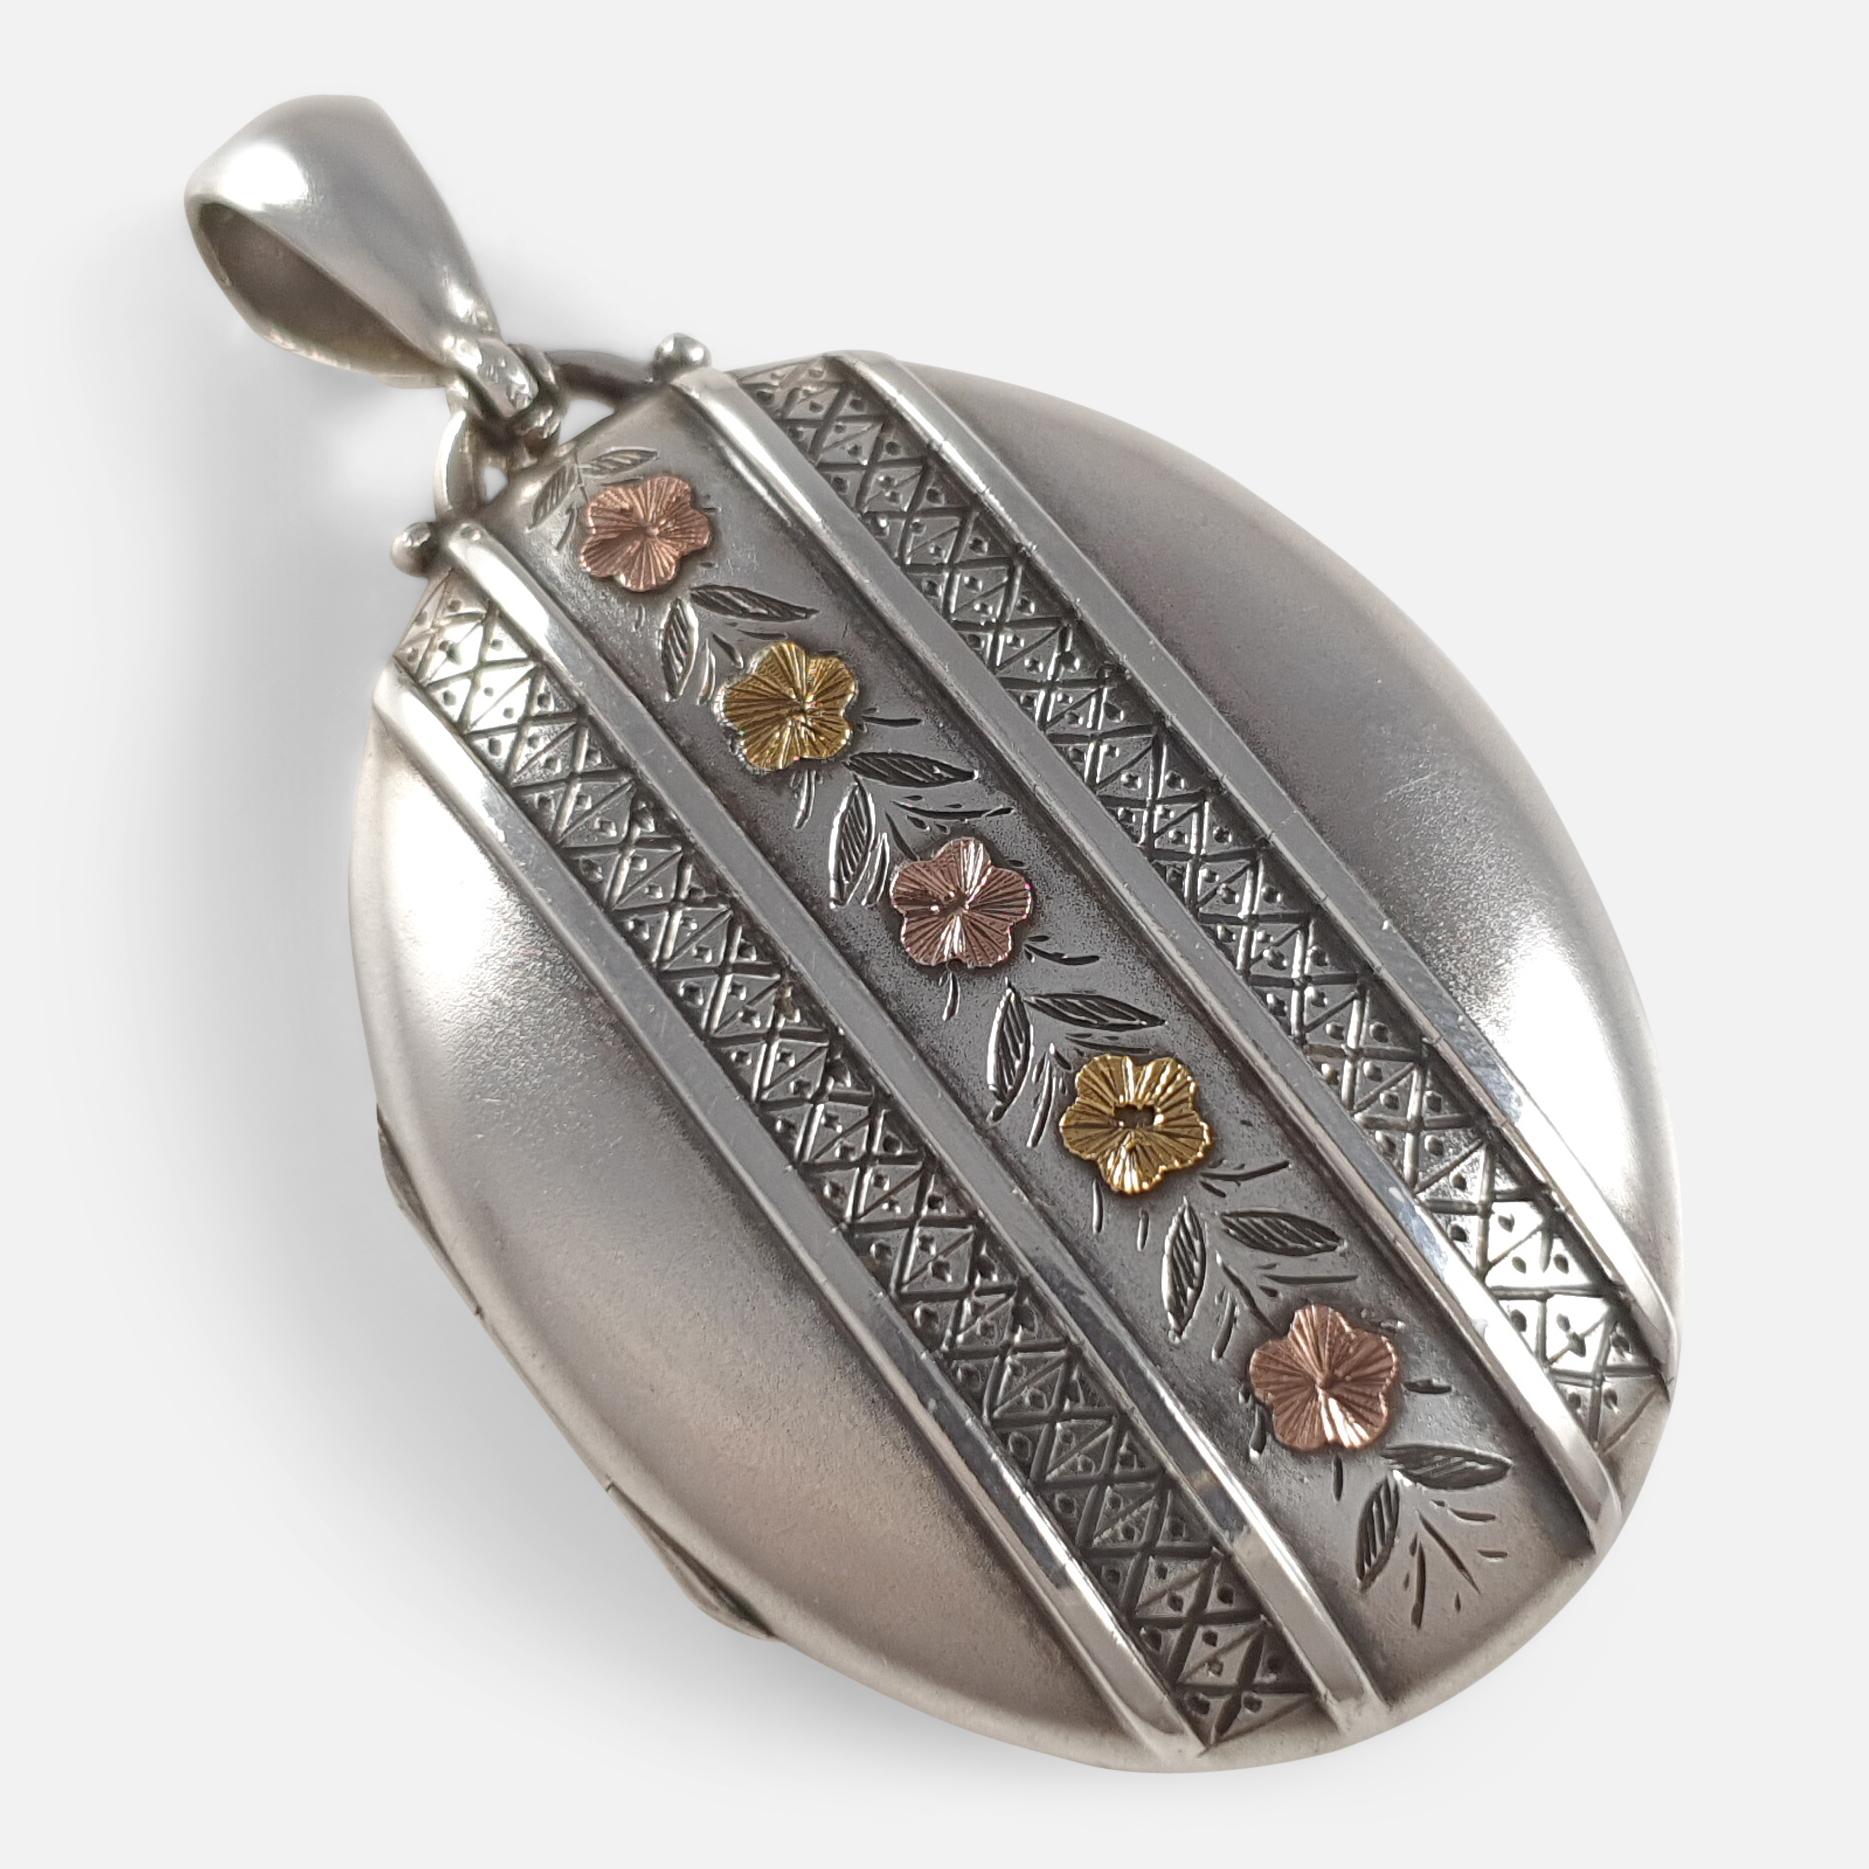 Description: - This is a fabulous antique Victorian sterling silver locket. The locket is engraved to the front with a column of flowers in two tone gold plating, and is plain polished to the back. The inside of the locket is lined with two pictures